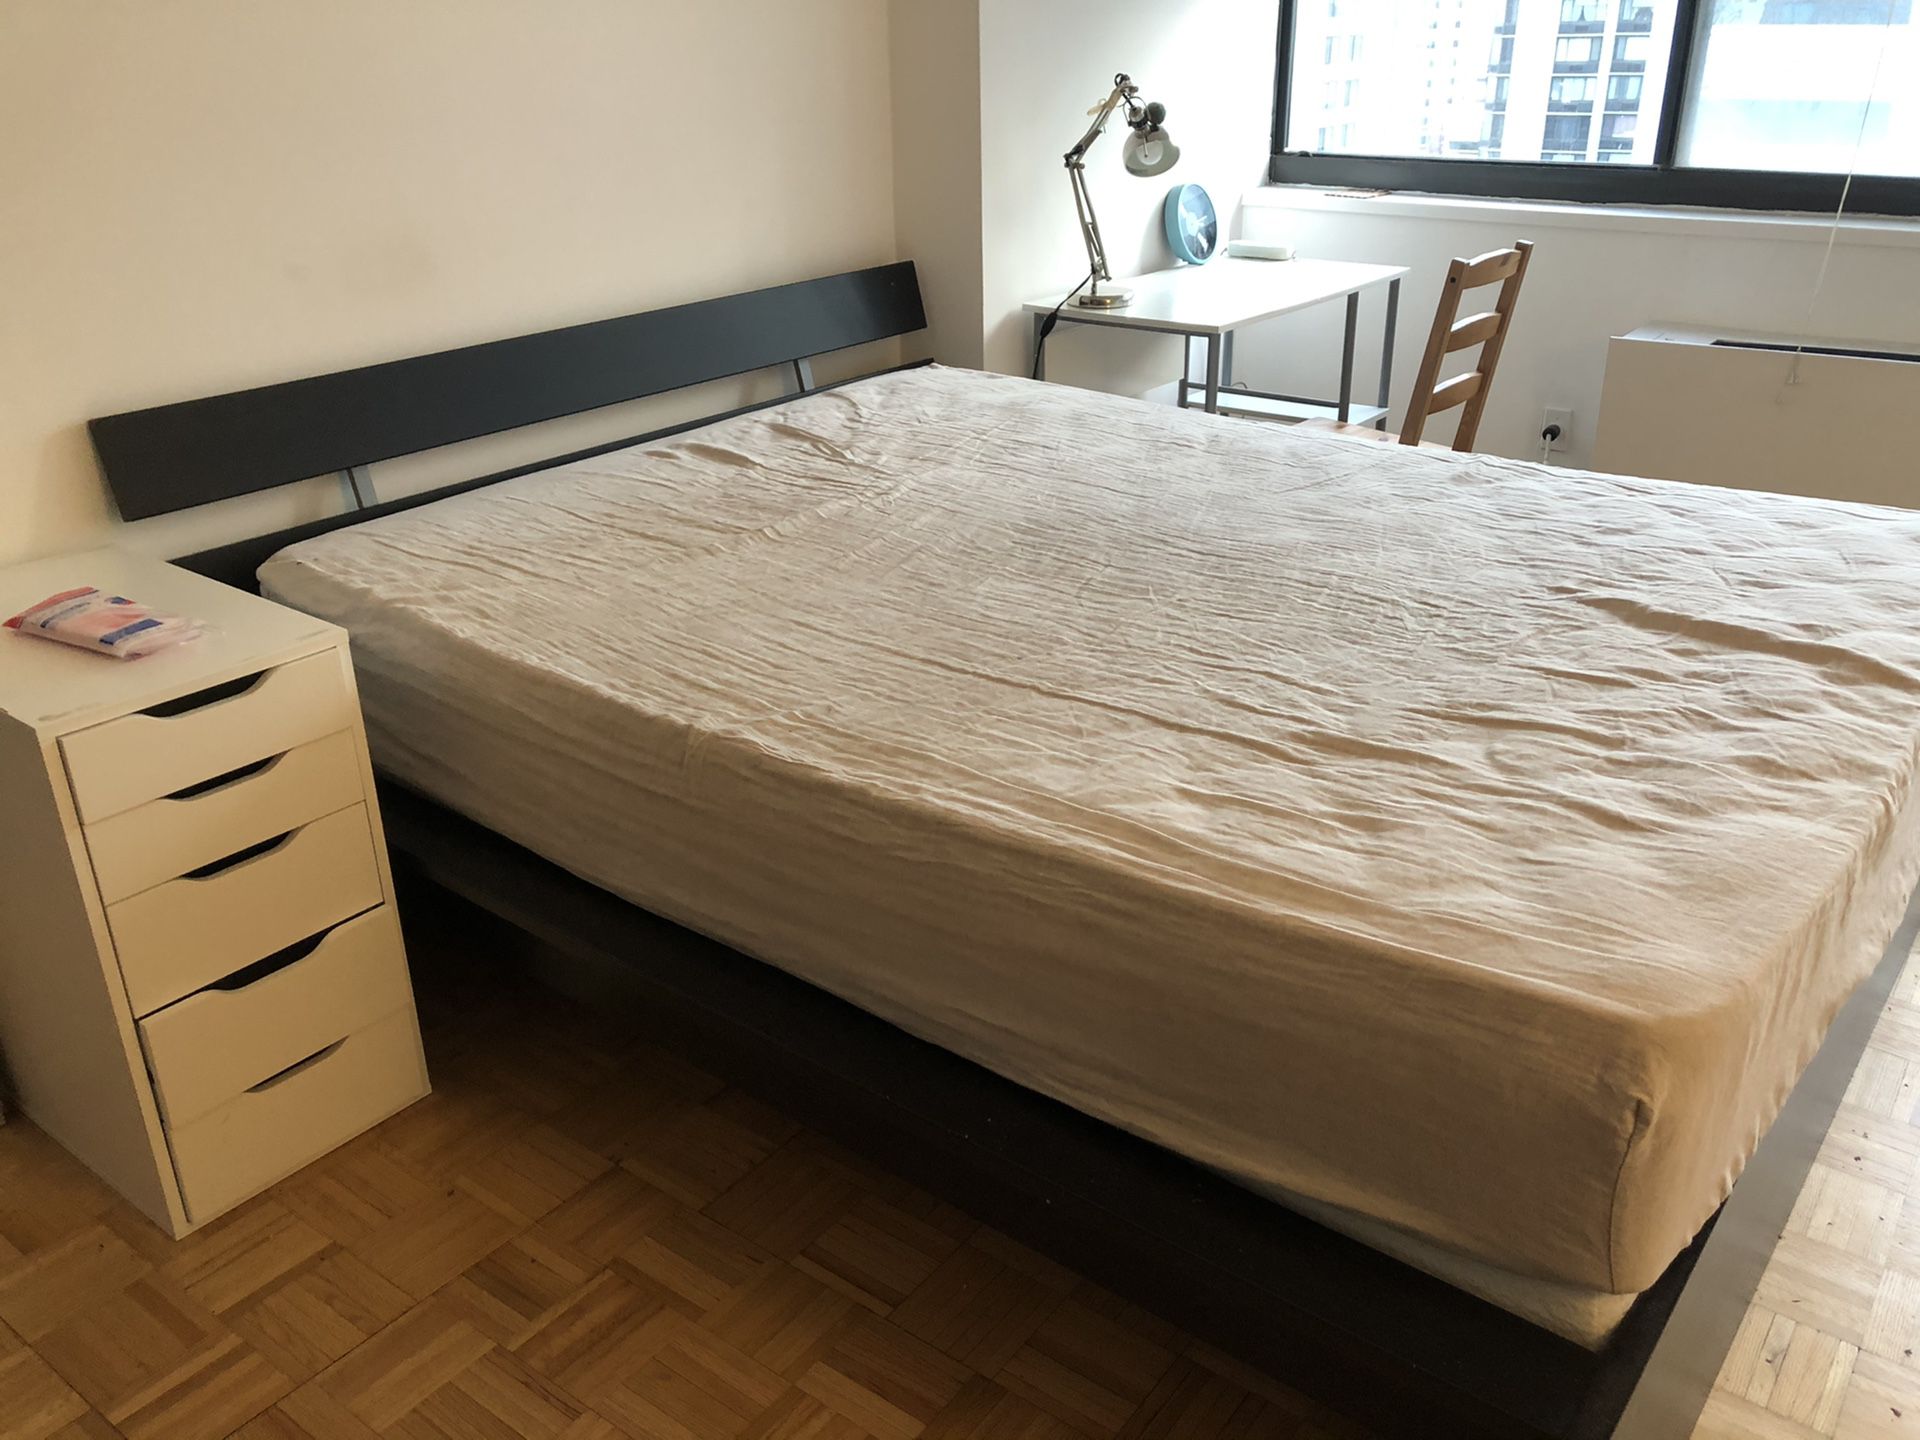 IKEA Queen Bed Frame and Two Matress